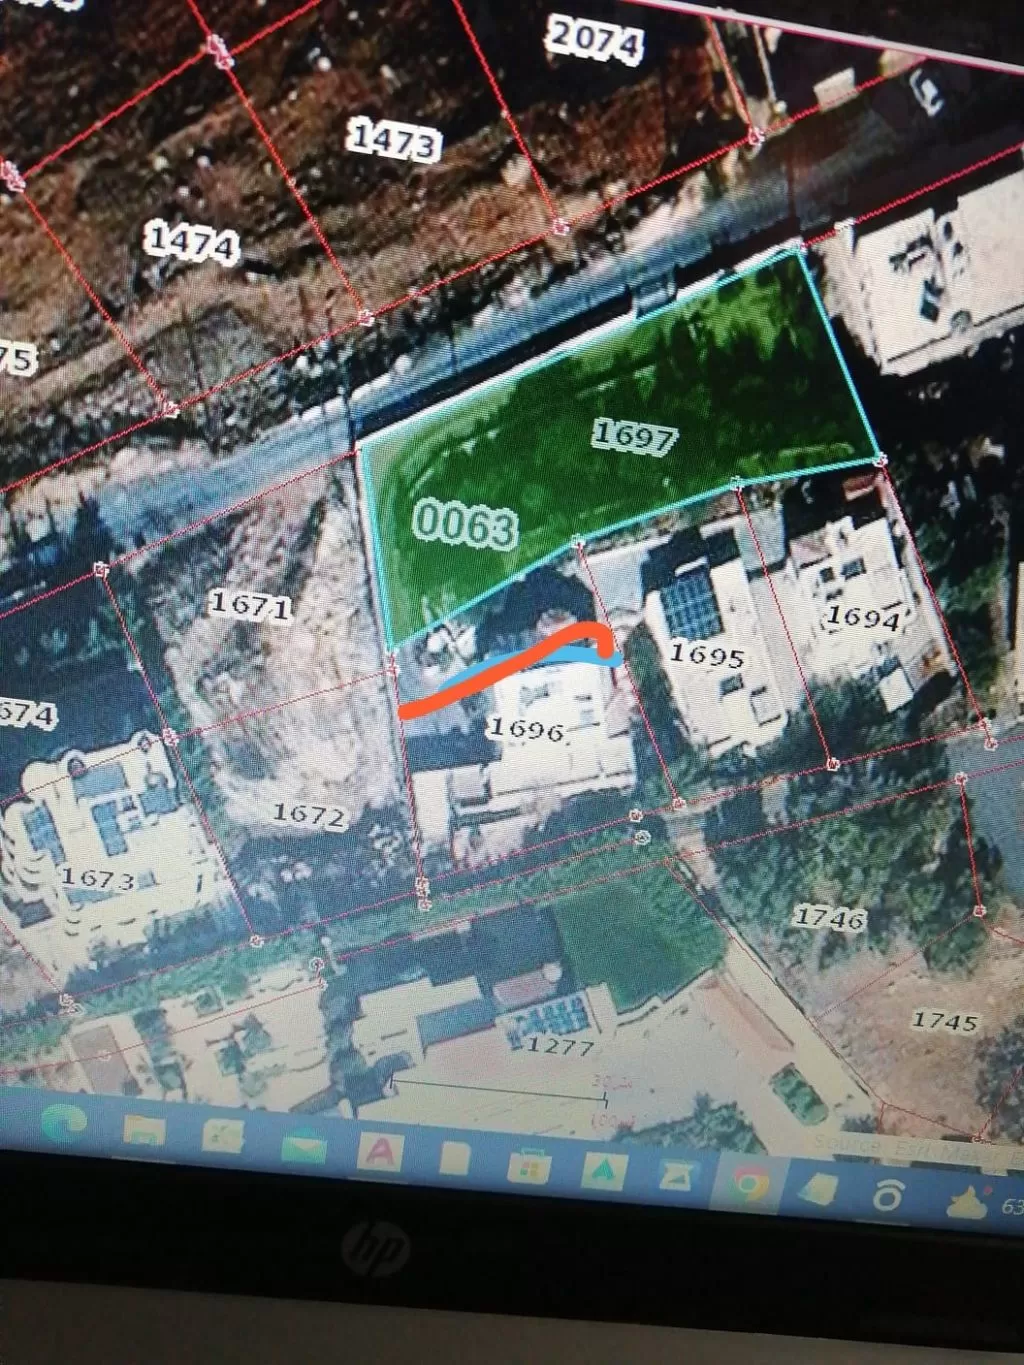 Land Ready Property Mixed Use Land  for sale in Amman #52525 - 1  image 